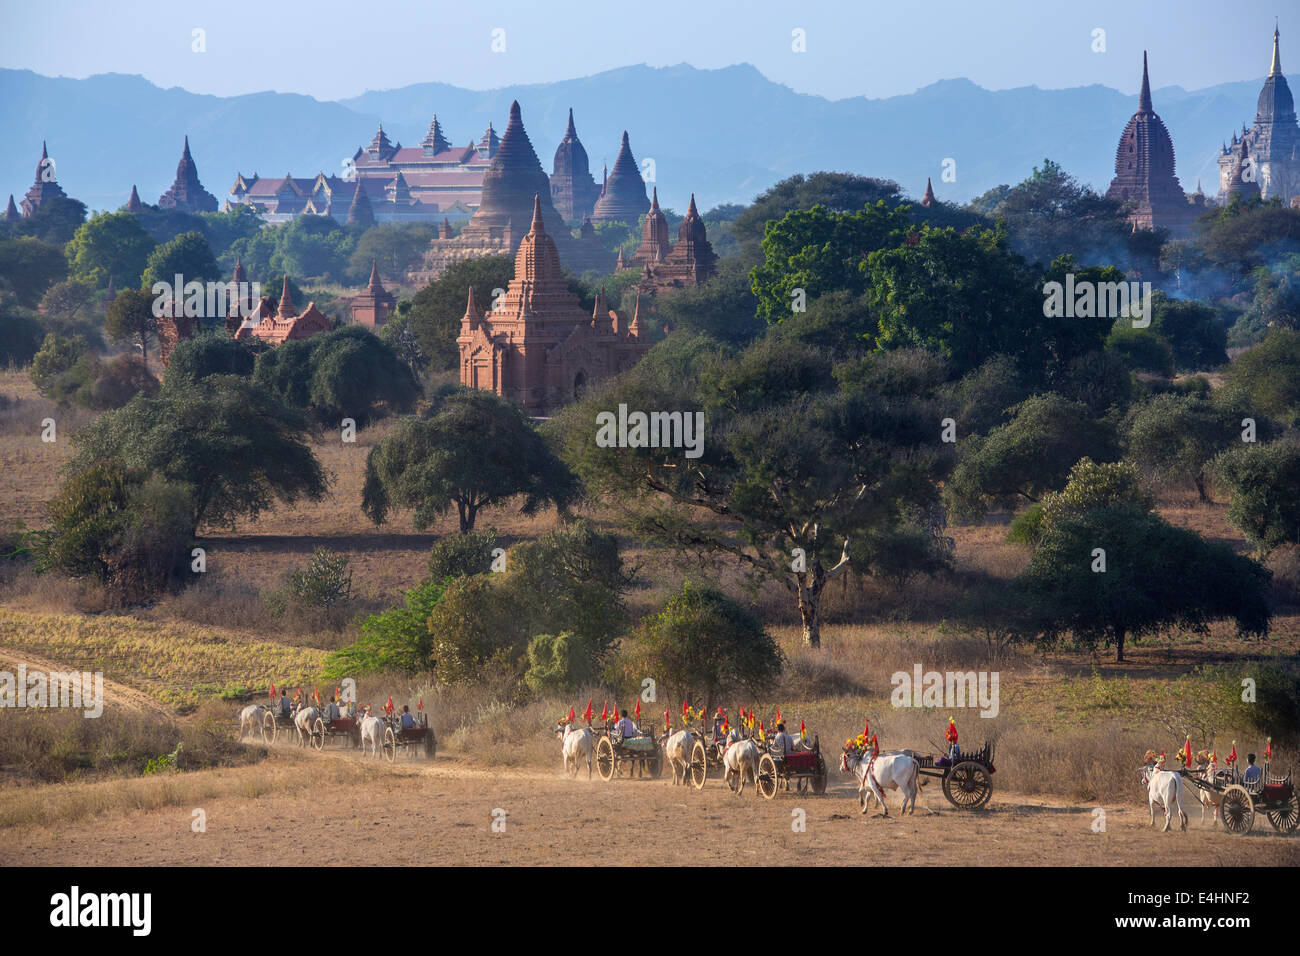 Temples of the Archaeological Zone in the ancient city of Bagan in Myanmar (Burma) Stock Photo